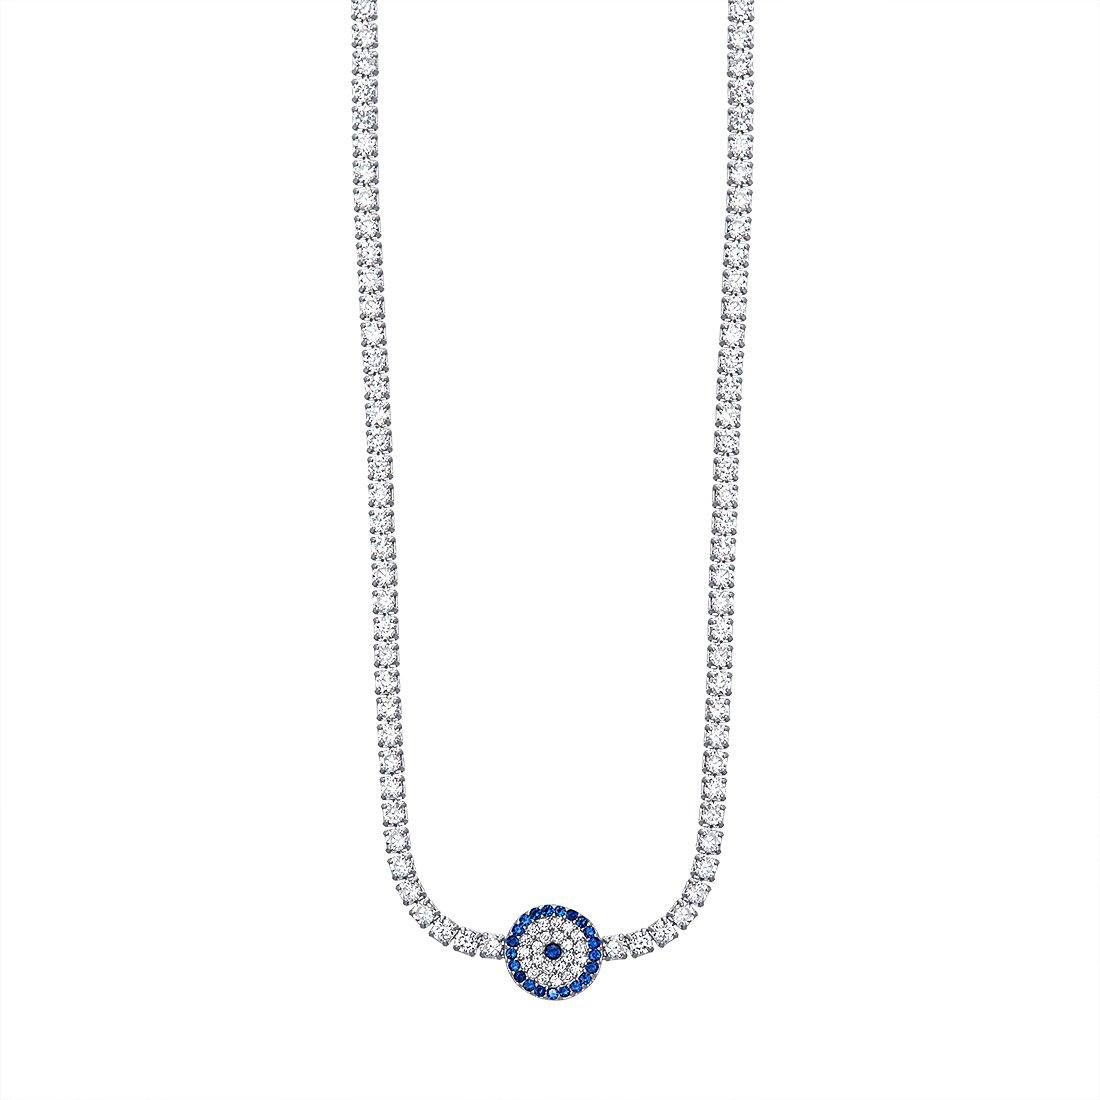 Evil Eye Tennis Necklace with Cubic Zirconia in Sterling Silver Necklaces Bevilles 